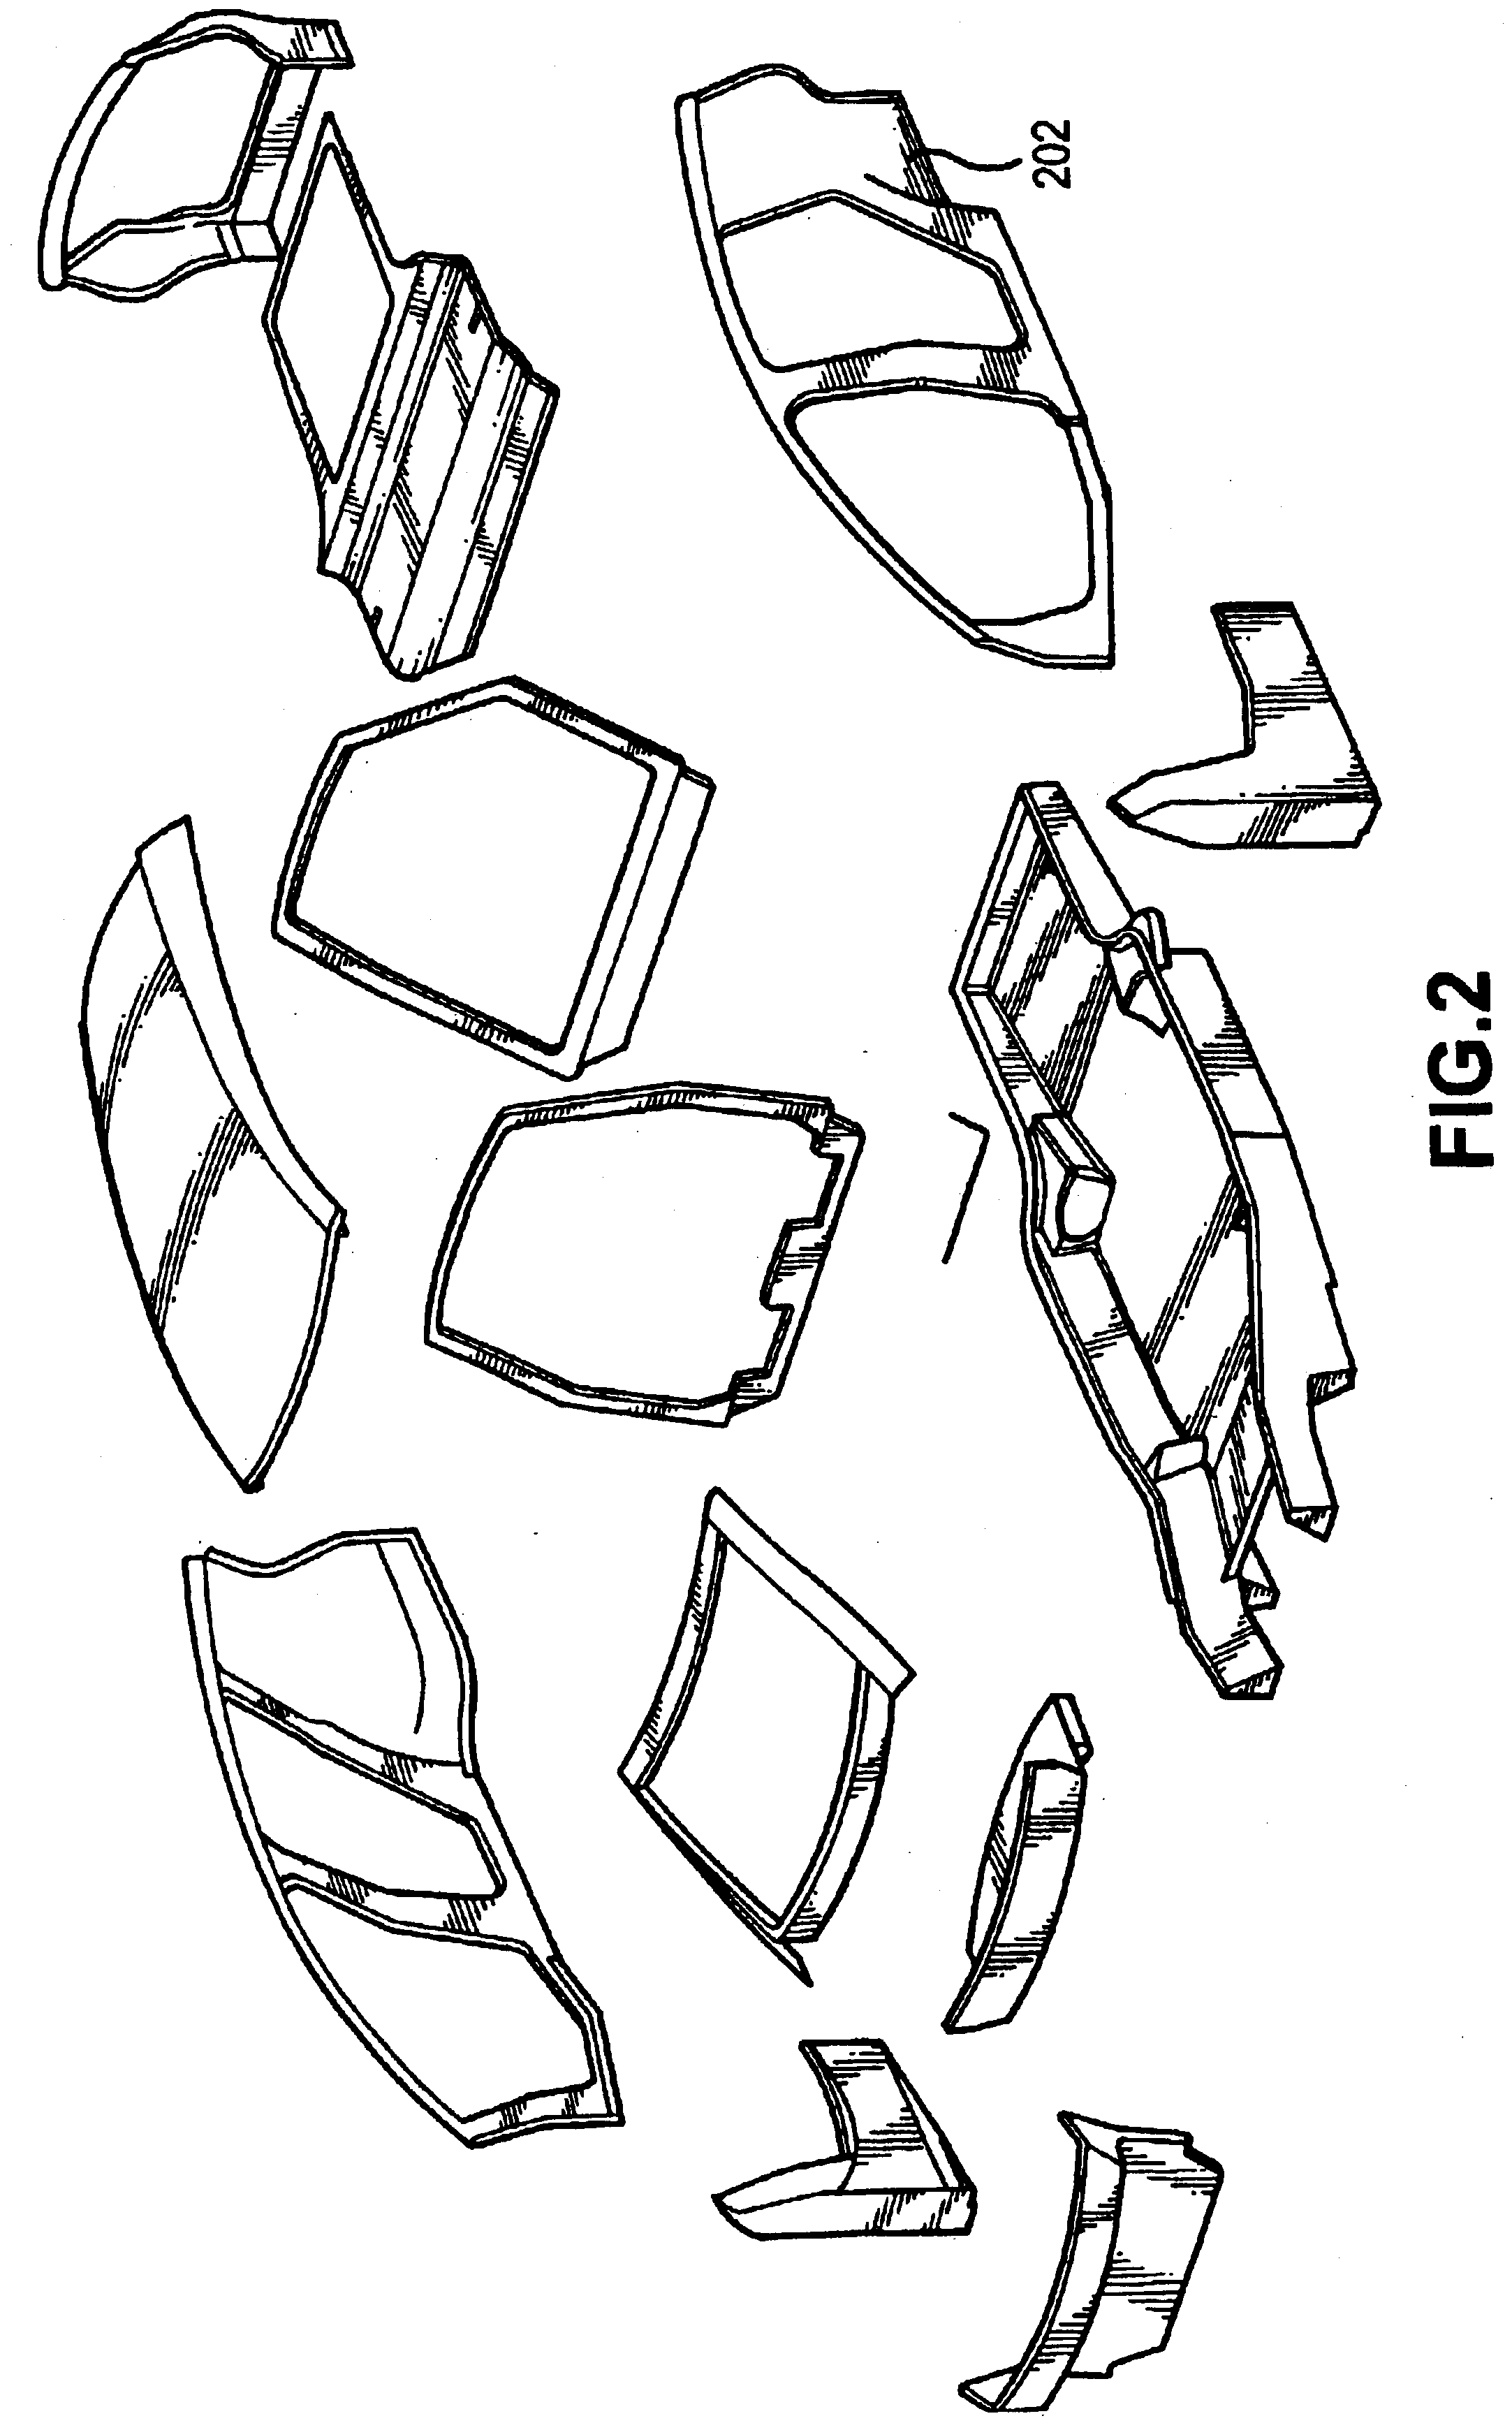 Process and equipment for manufacture of advanced composite structures